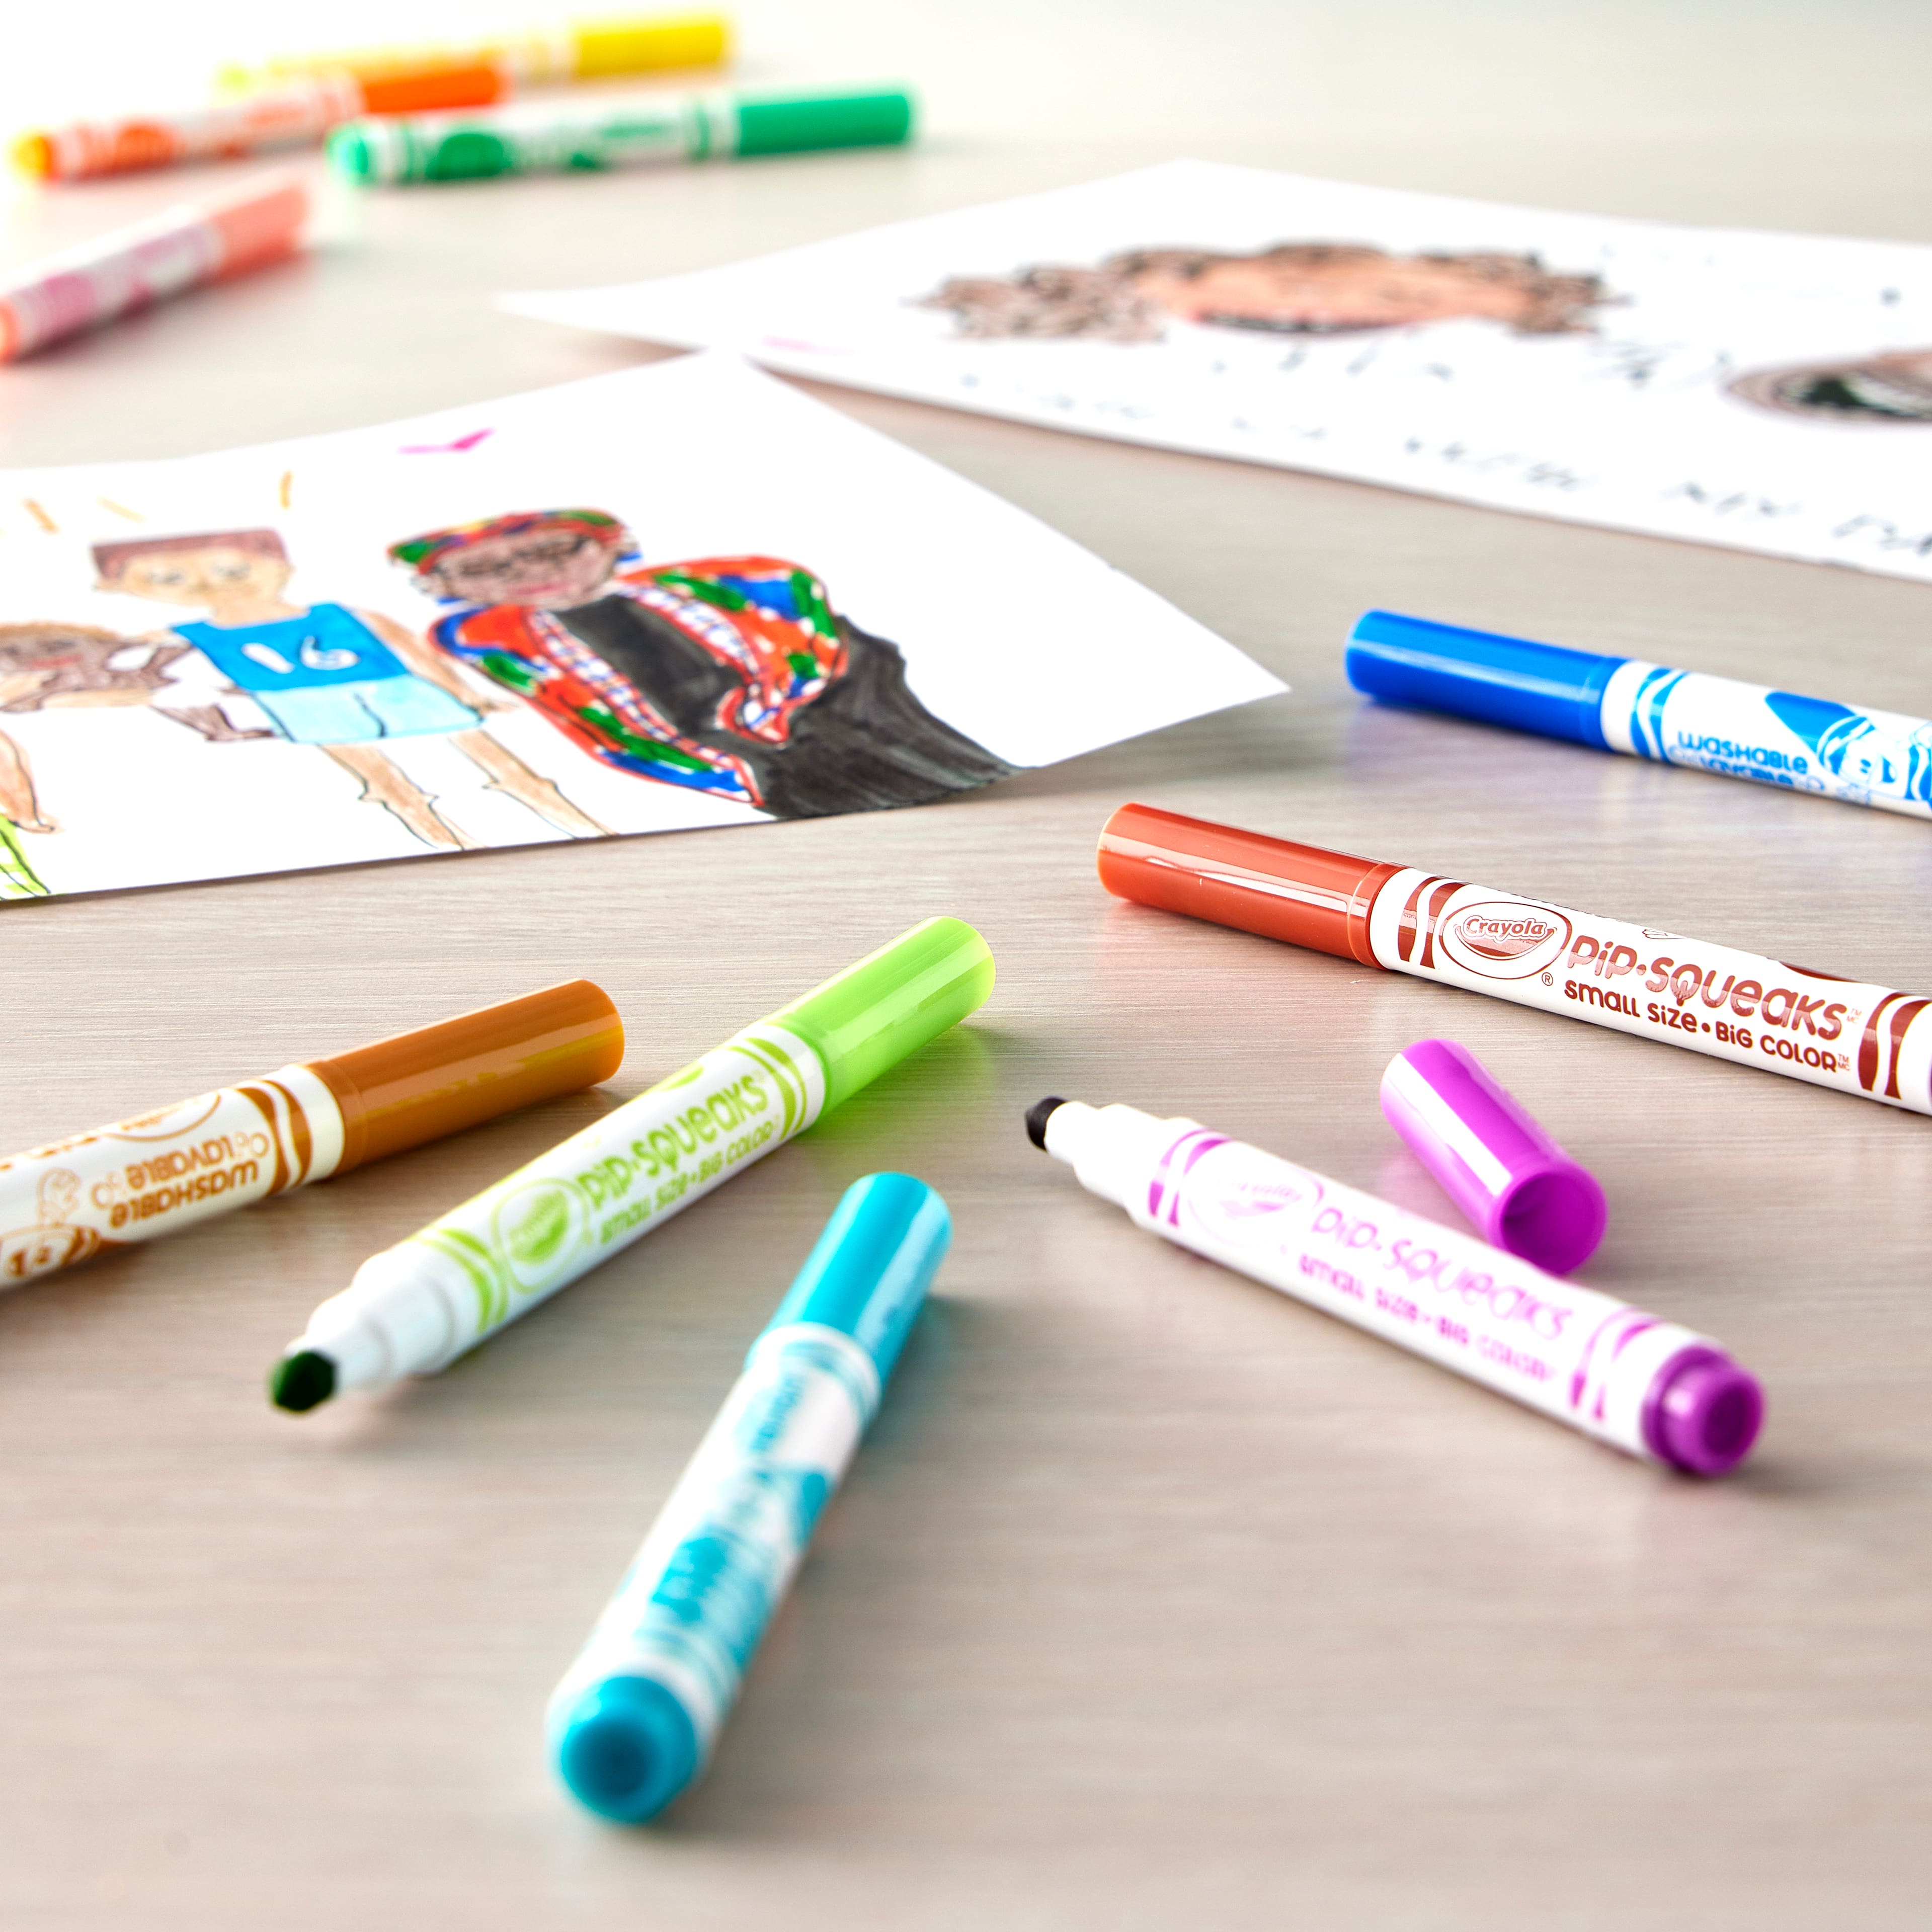 Crayola® Pip-Squeaks™ Washable Markers